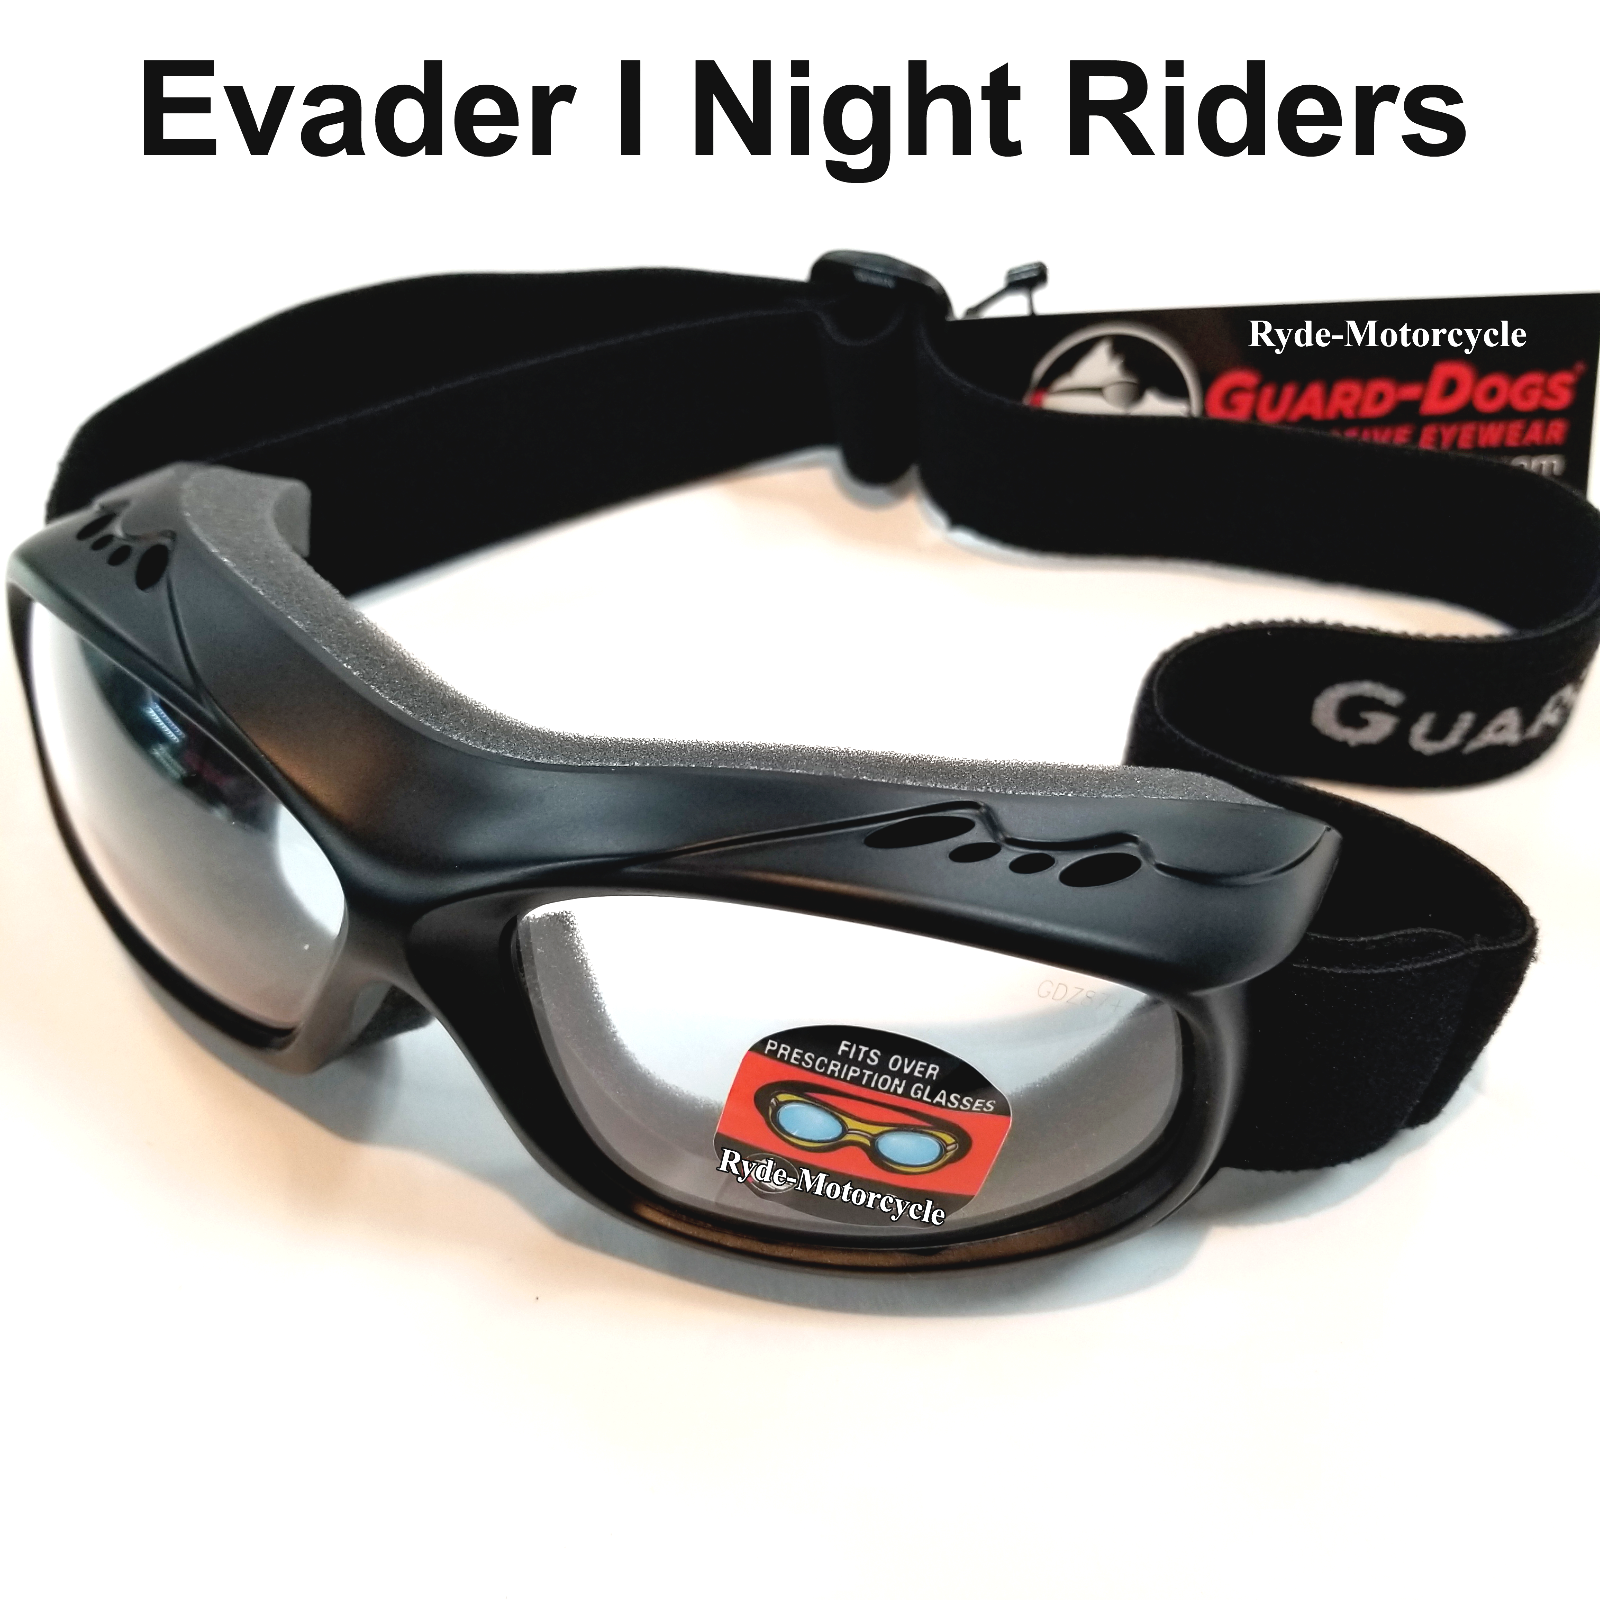 Guard-Dogs Evader-1 Clear OTG Goggles